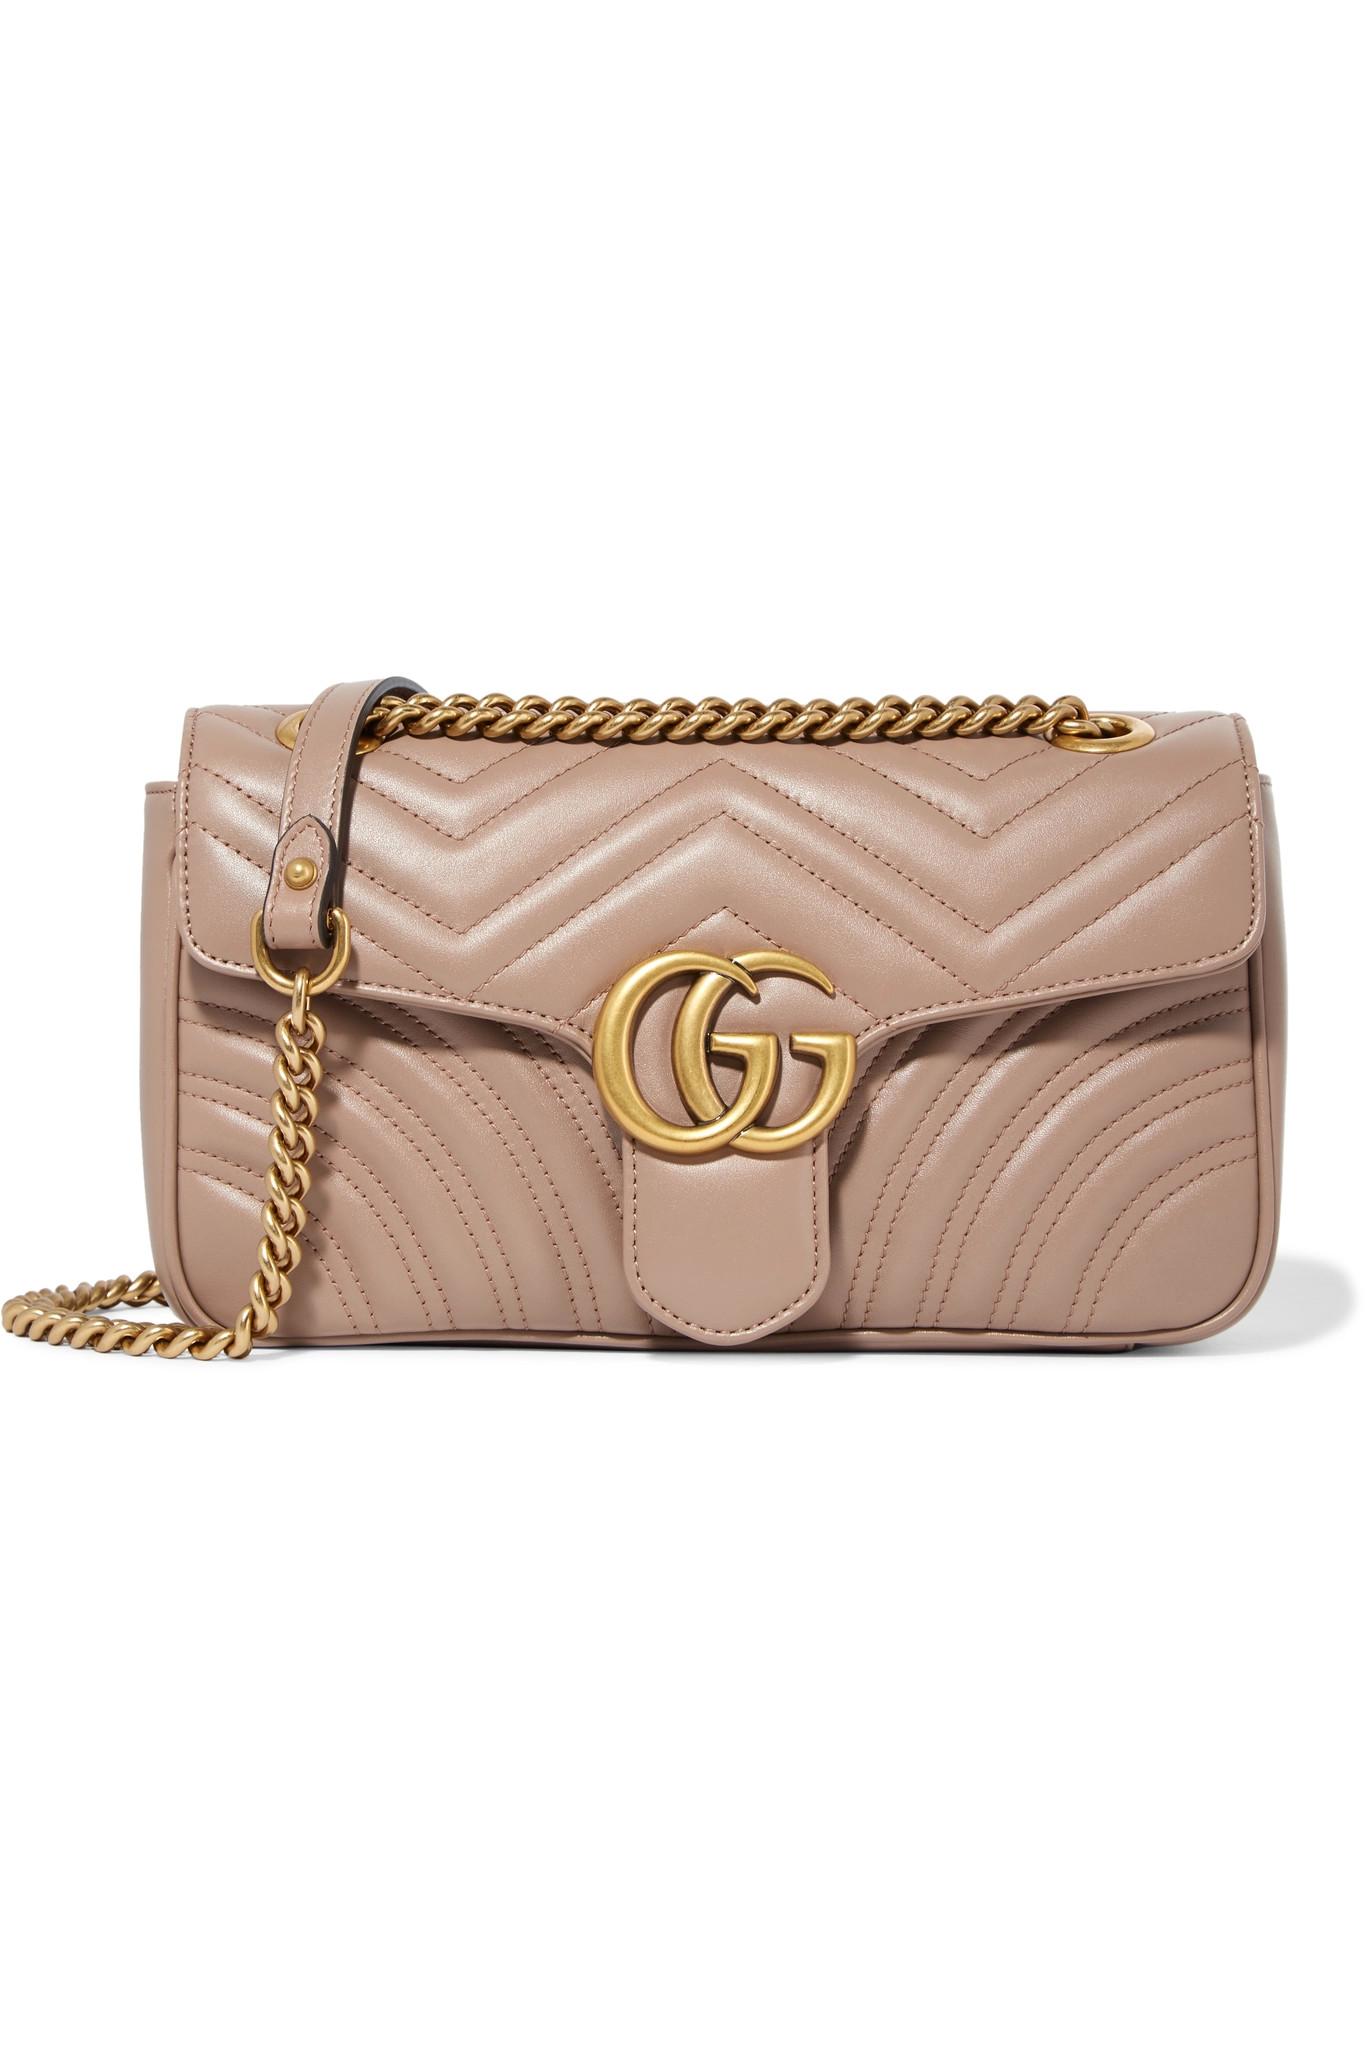 Gucci Gg Marmont Small Quilted Leather Shoulder Bag in Natural - Lyst